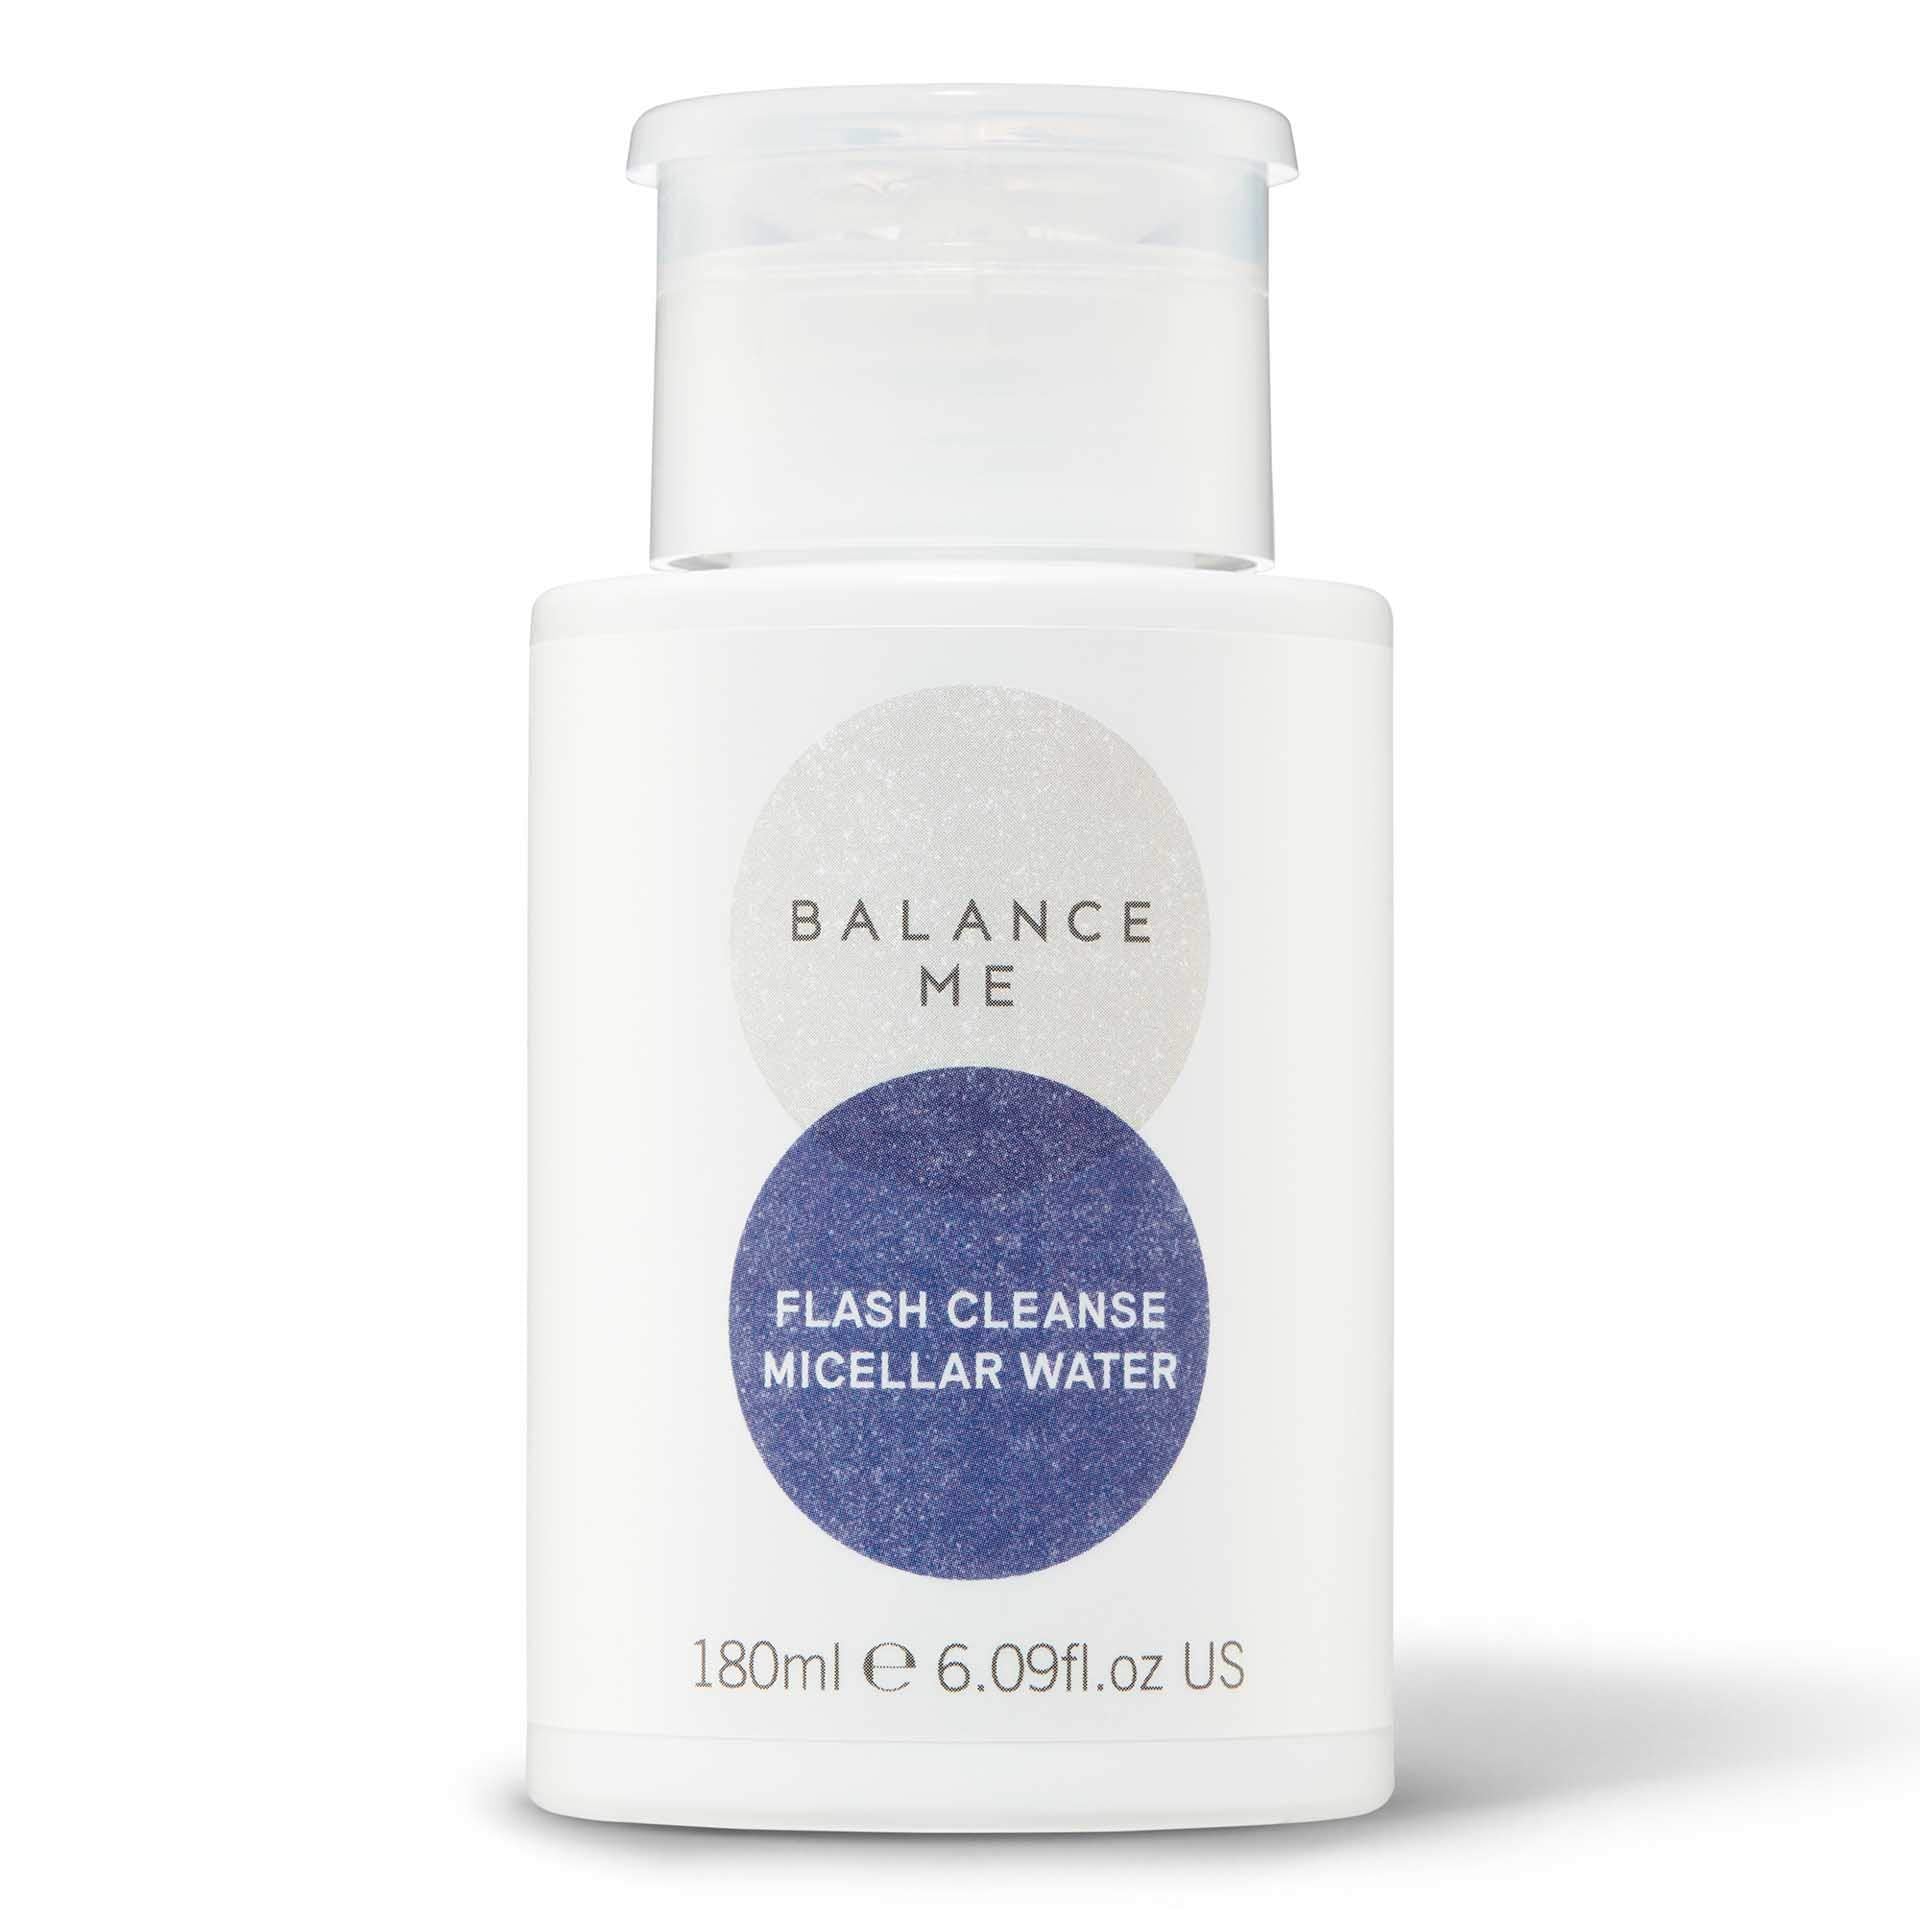 Balance Me Flash Cleanse Micellar Water – Facial Cleanser – Removes Dirt & Make-Up – With Hyaluronic Acid & Peptides – Suits All Skin Types – 100% Natural – Vegan & Cruelty-Free – Made in UK – 180ml